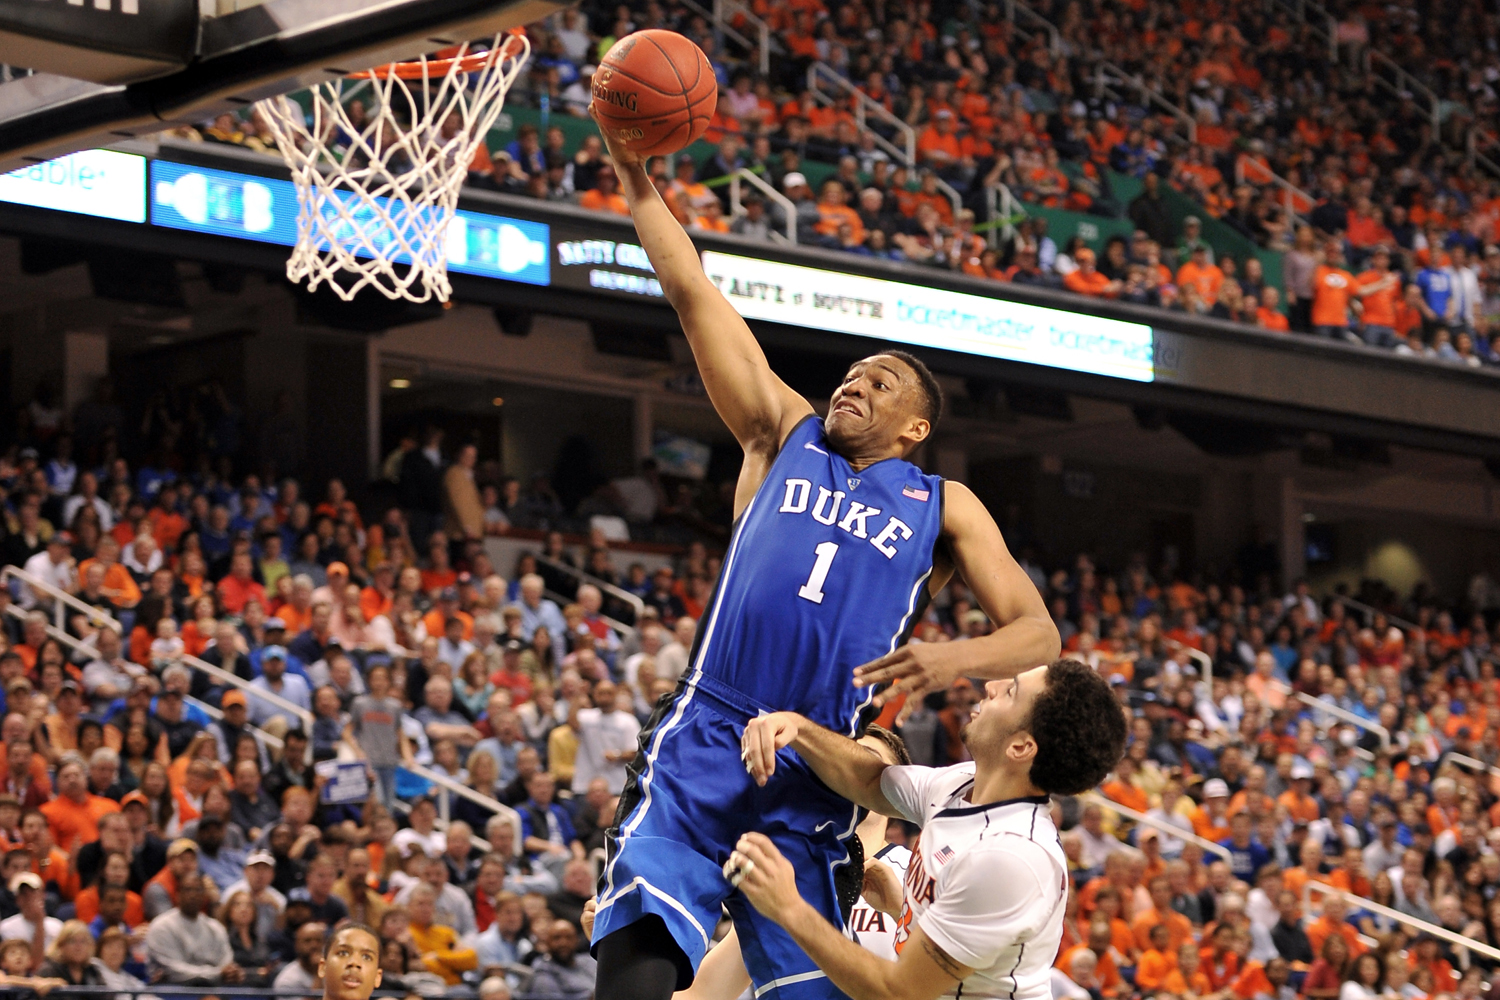  Jabari Parker, #1 of the Duke Blue Devils, goes up for a dunk against the Virginia Cavaliers during the finals of the 2014 Men's ACC Basketball Tournament on March 16, 2014 in Greensboro, North Carolina. Virginia defeated Duke 72-63. 